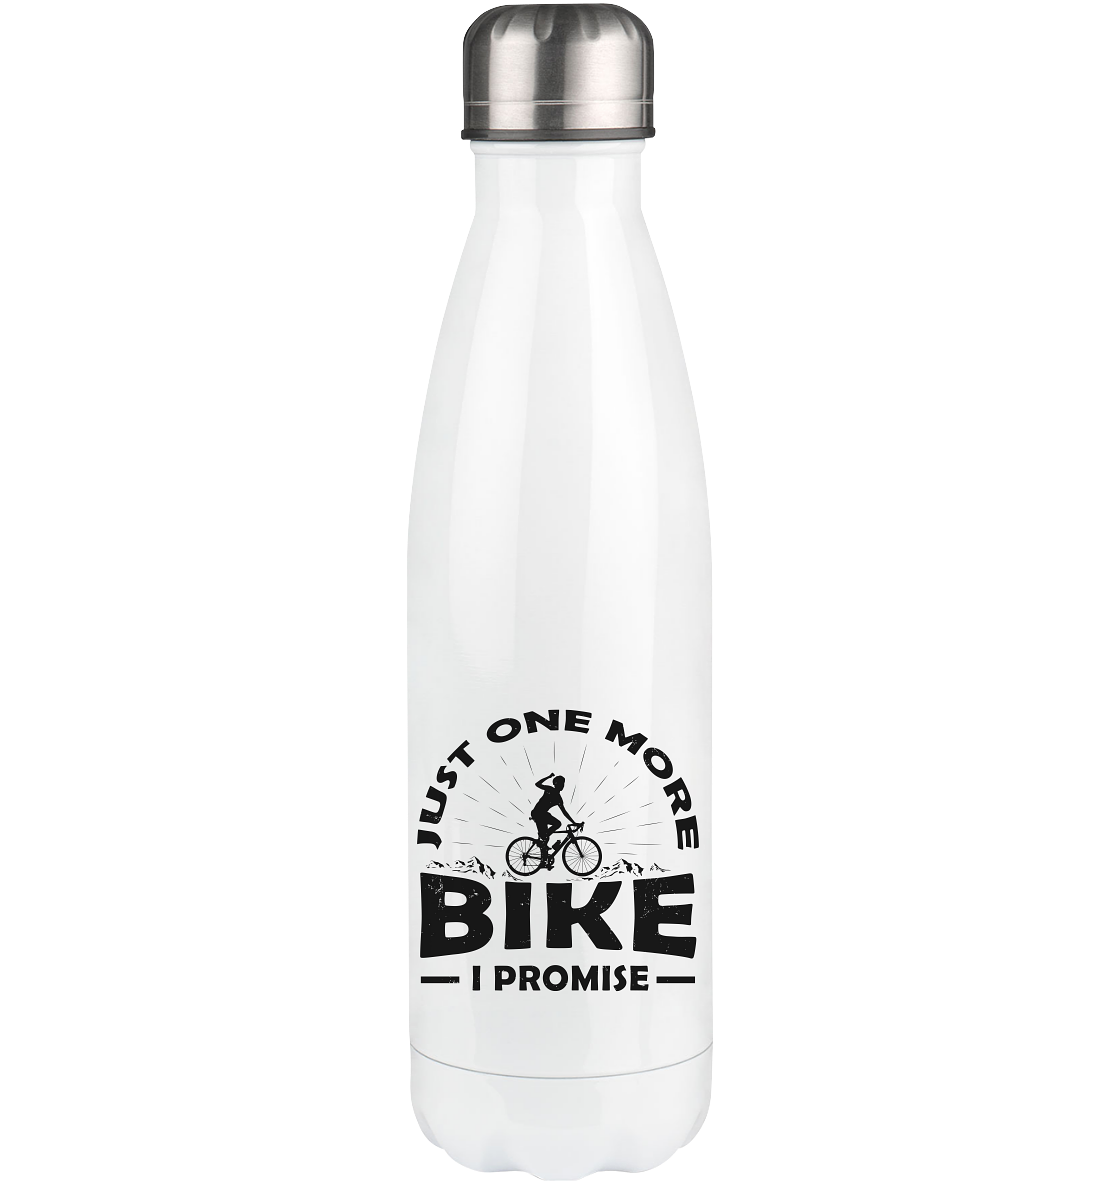 Just one more bike, i promise - Edelstahl Thermosflasche fahrrad 500ml